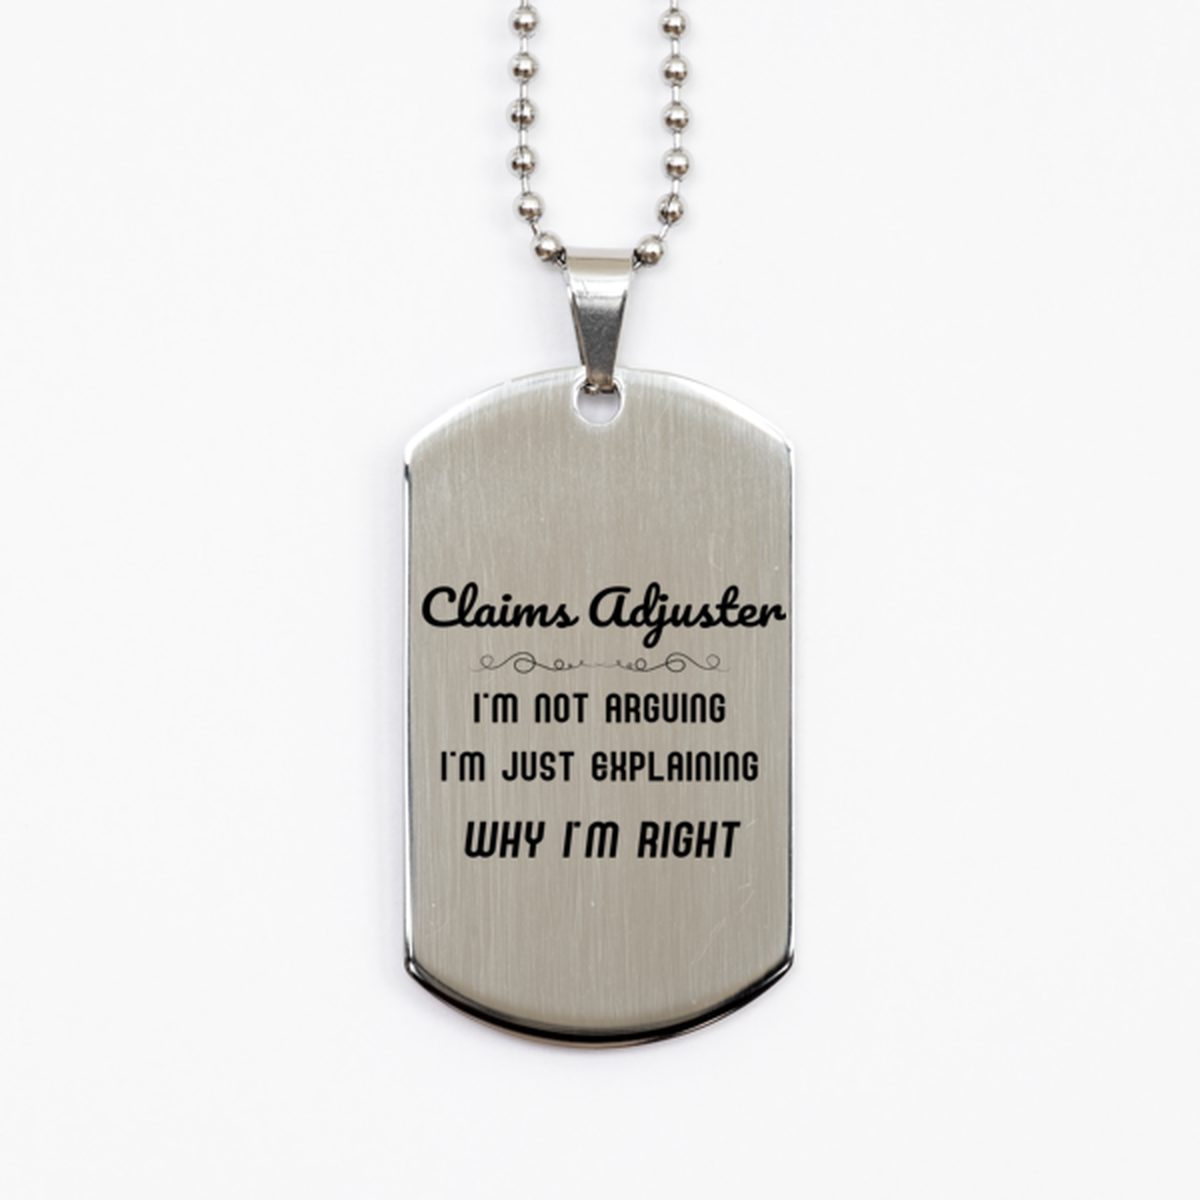 Claims Adjuster I'm not Arguing. I'm Just Explaining Why I'm RIGHT Silver Dog Tag, Funny Saying Quote Claims Adjuster Gifts For Claims Adjuster Graduation Birthday Christmas Gifts for Men Women Coworker